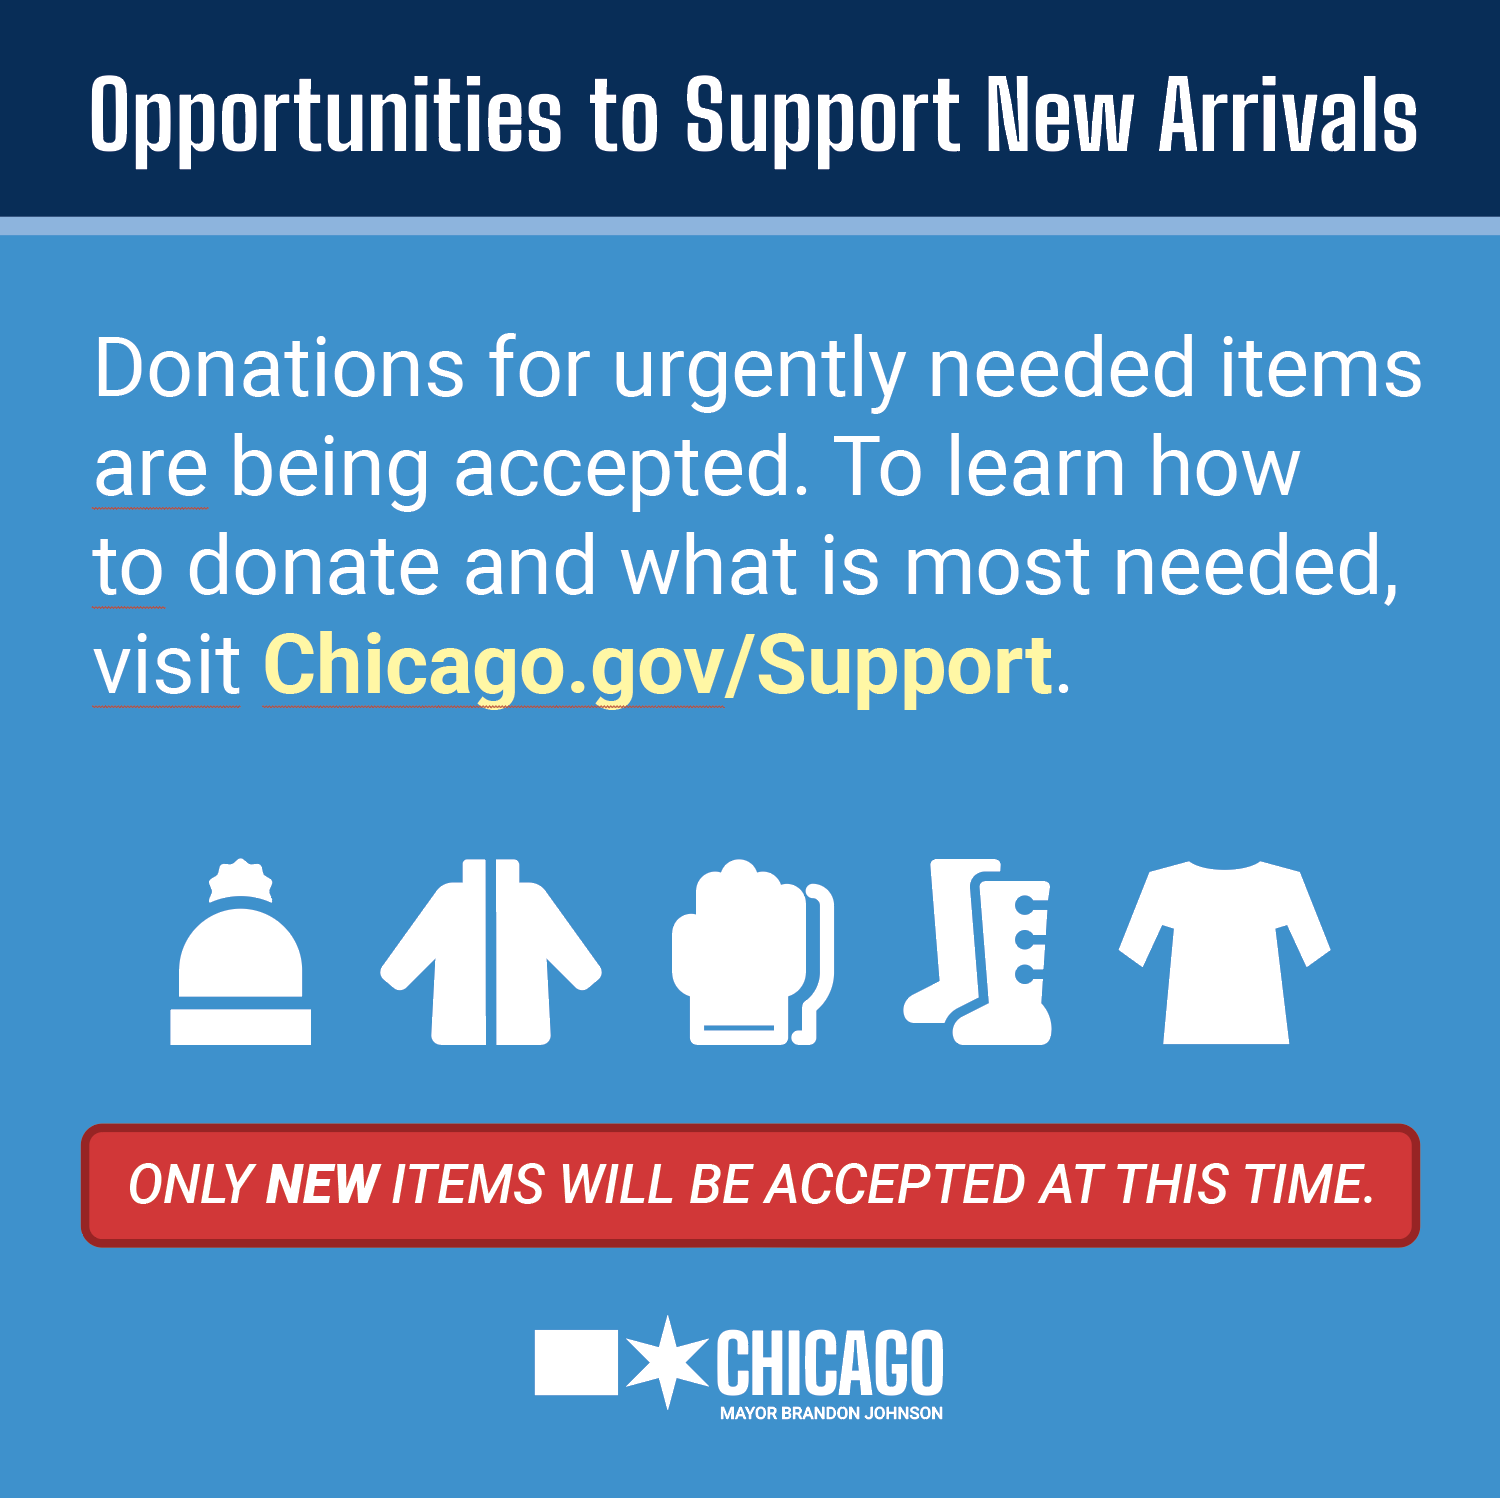 Opportunities to Support New Arrivals